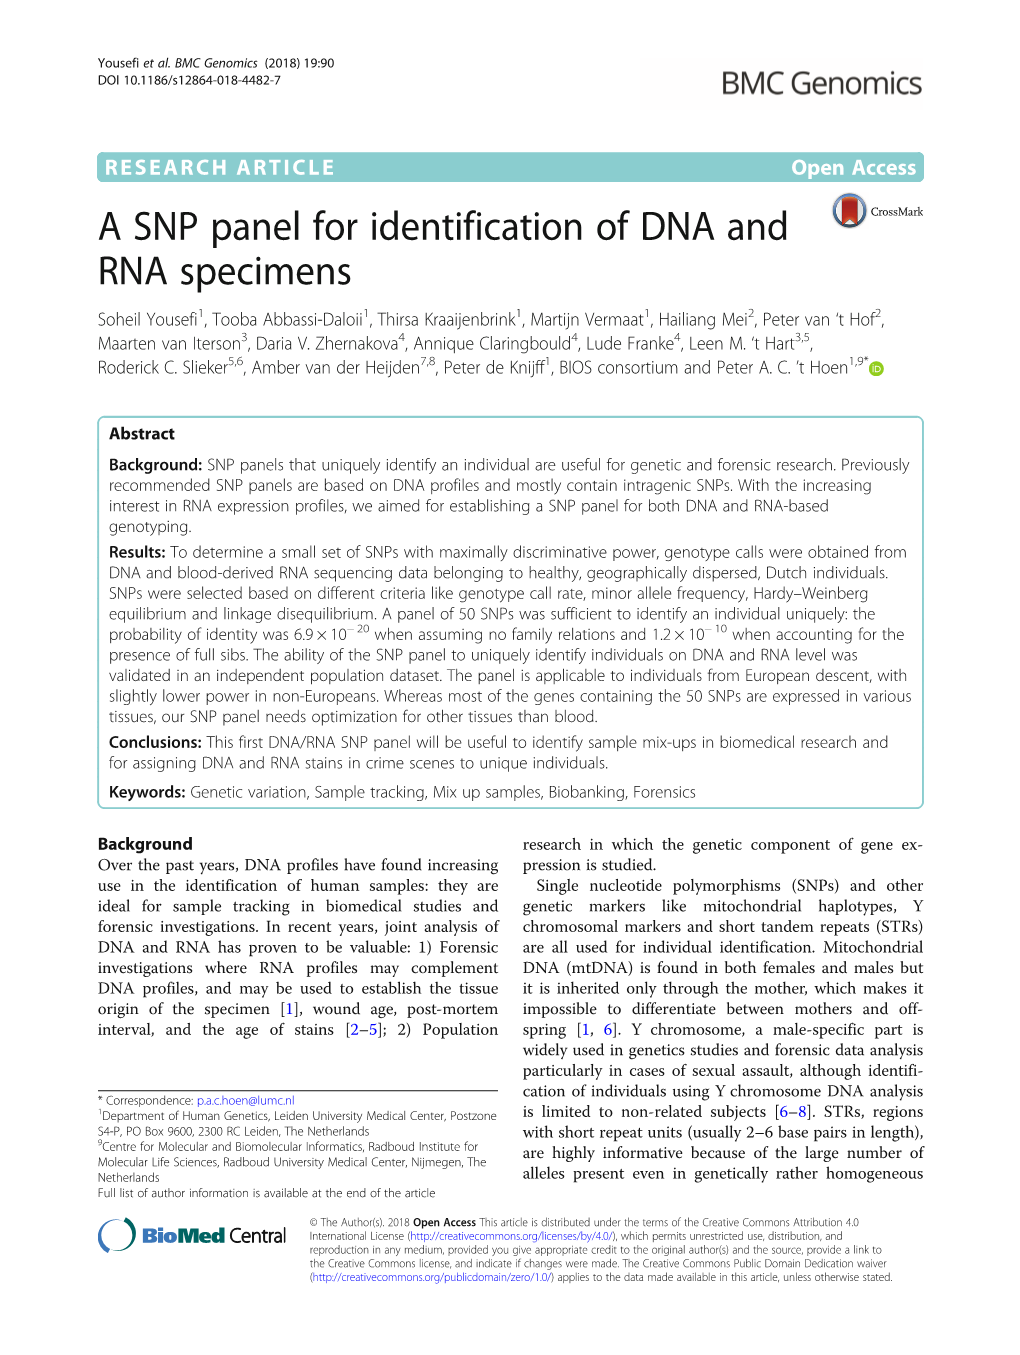 A SNP Panel for Identification of DNA and RNA Specimens